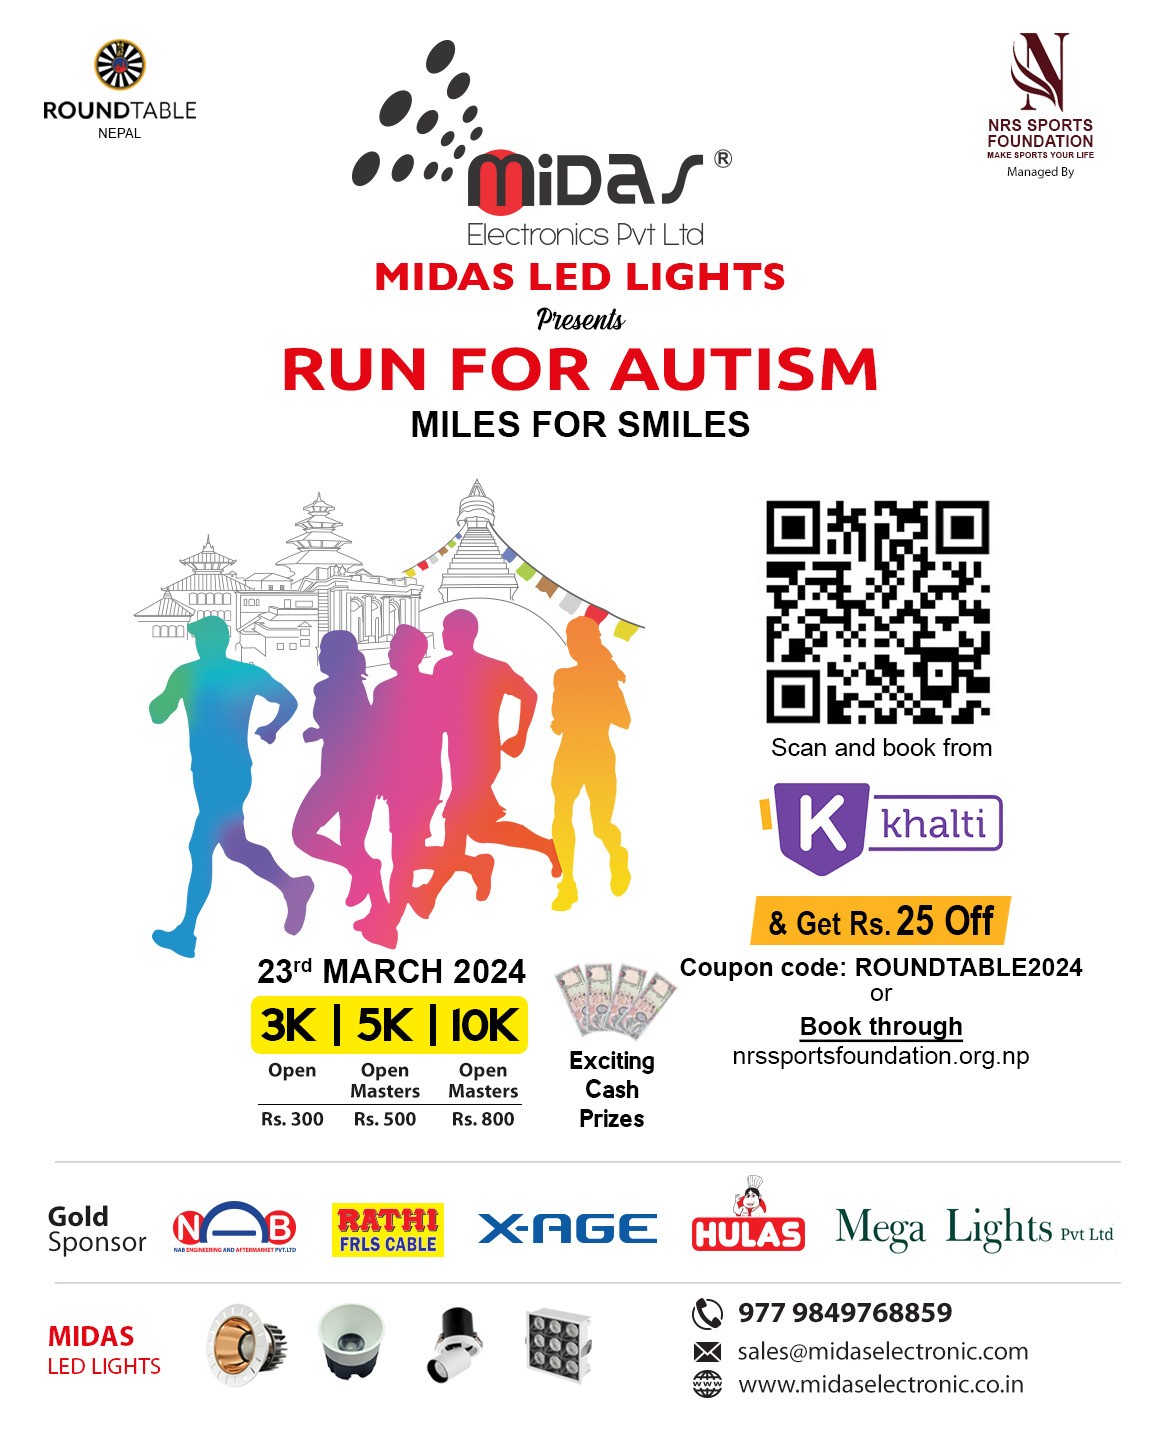 Run For Autism - Miles For Smiles